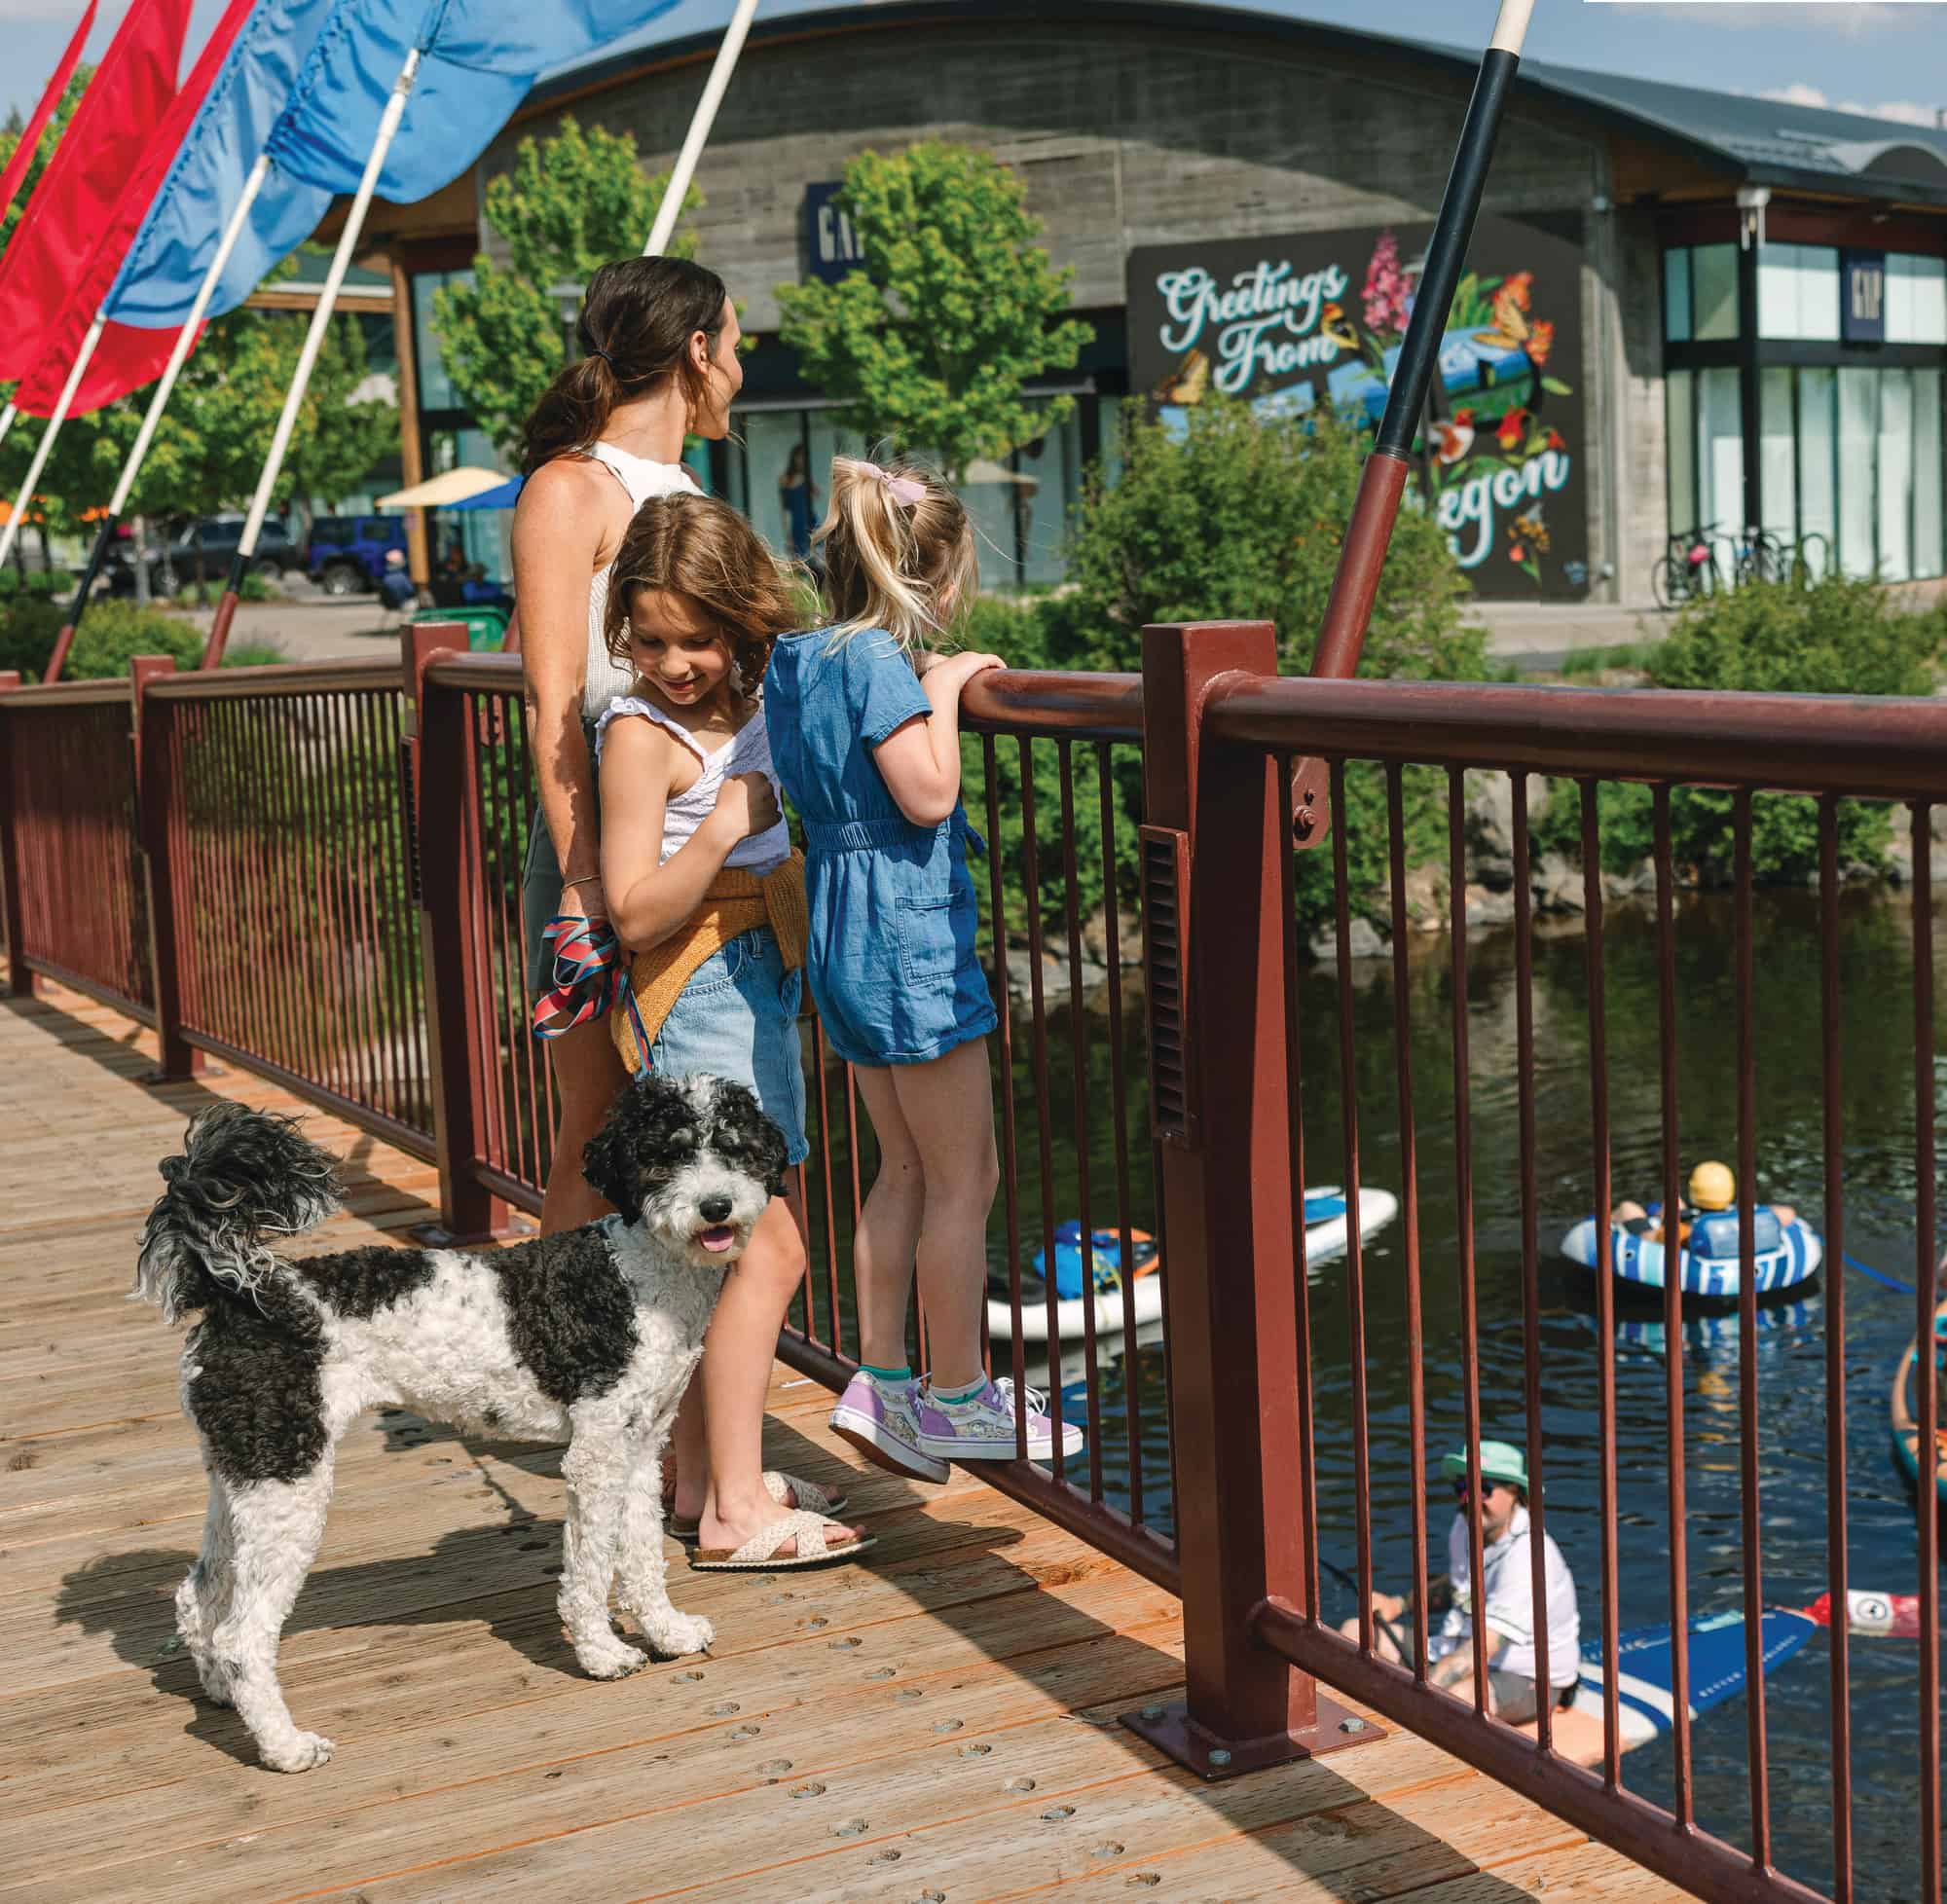 A 3-mile hike along the Deschutes River in Bend is a great one for people and pooches, or take a stroll through the Old Mill District.